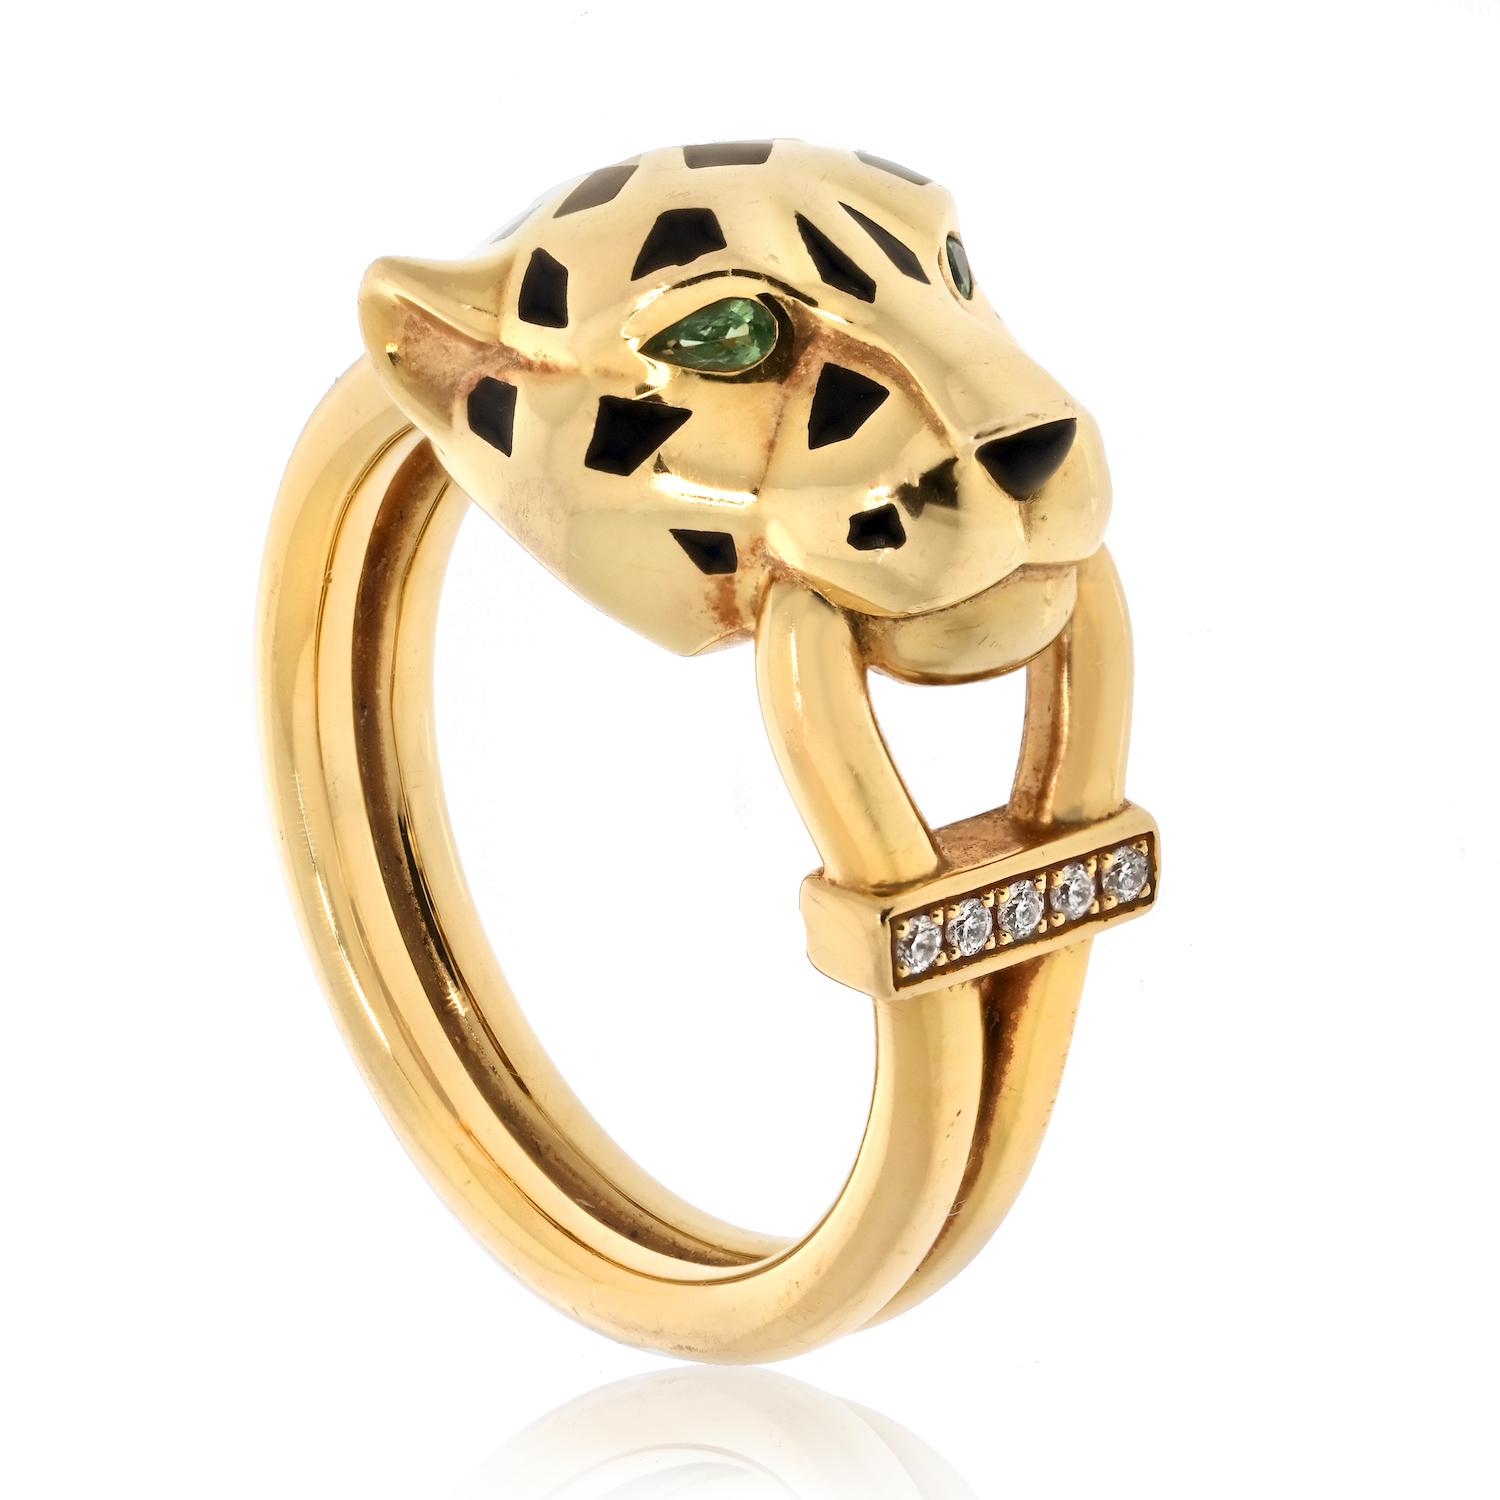 Well-crafted jewelry like this one is hard to come by. This Panthère de Cartier ring carries the iconic Panther symbol, which has been a sign of recognition of the timeless brand for decades, making the creation all the more special. 

Its